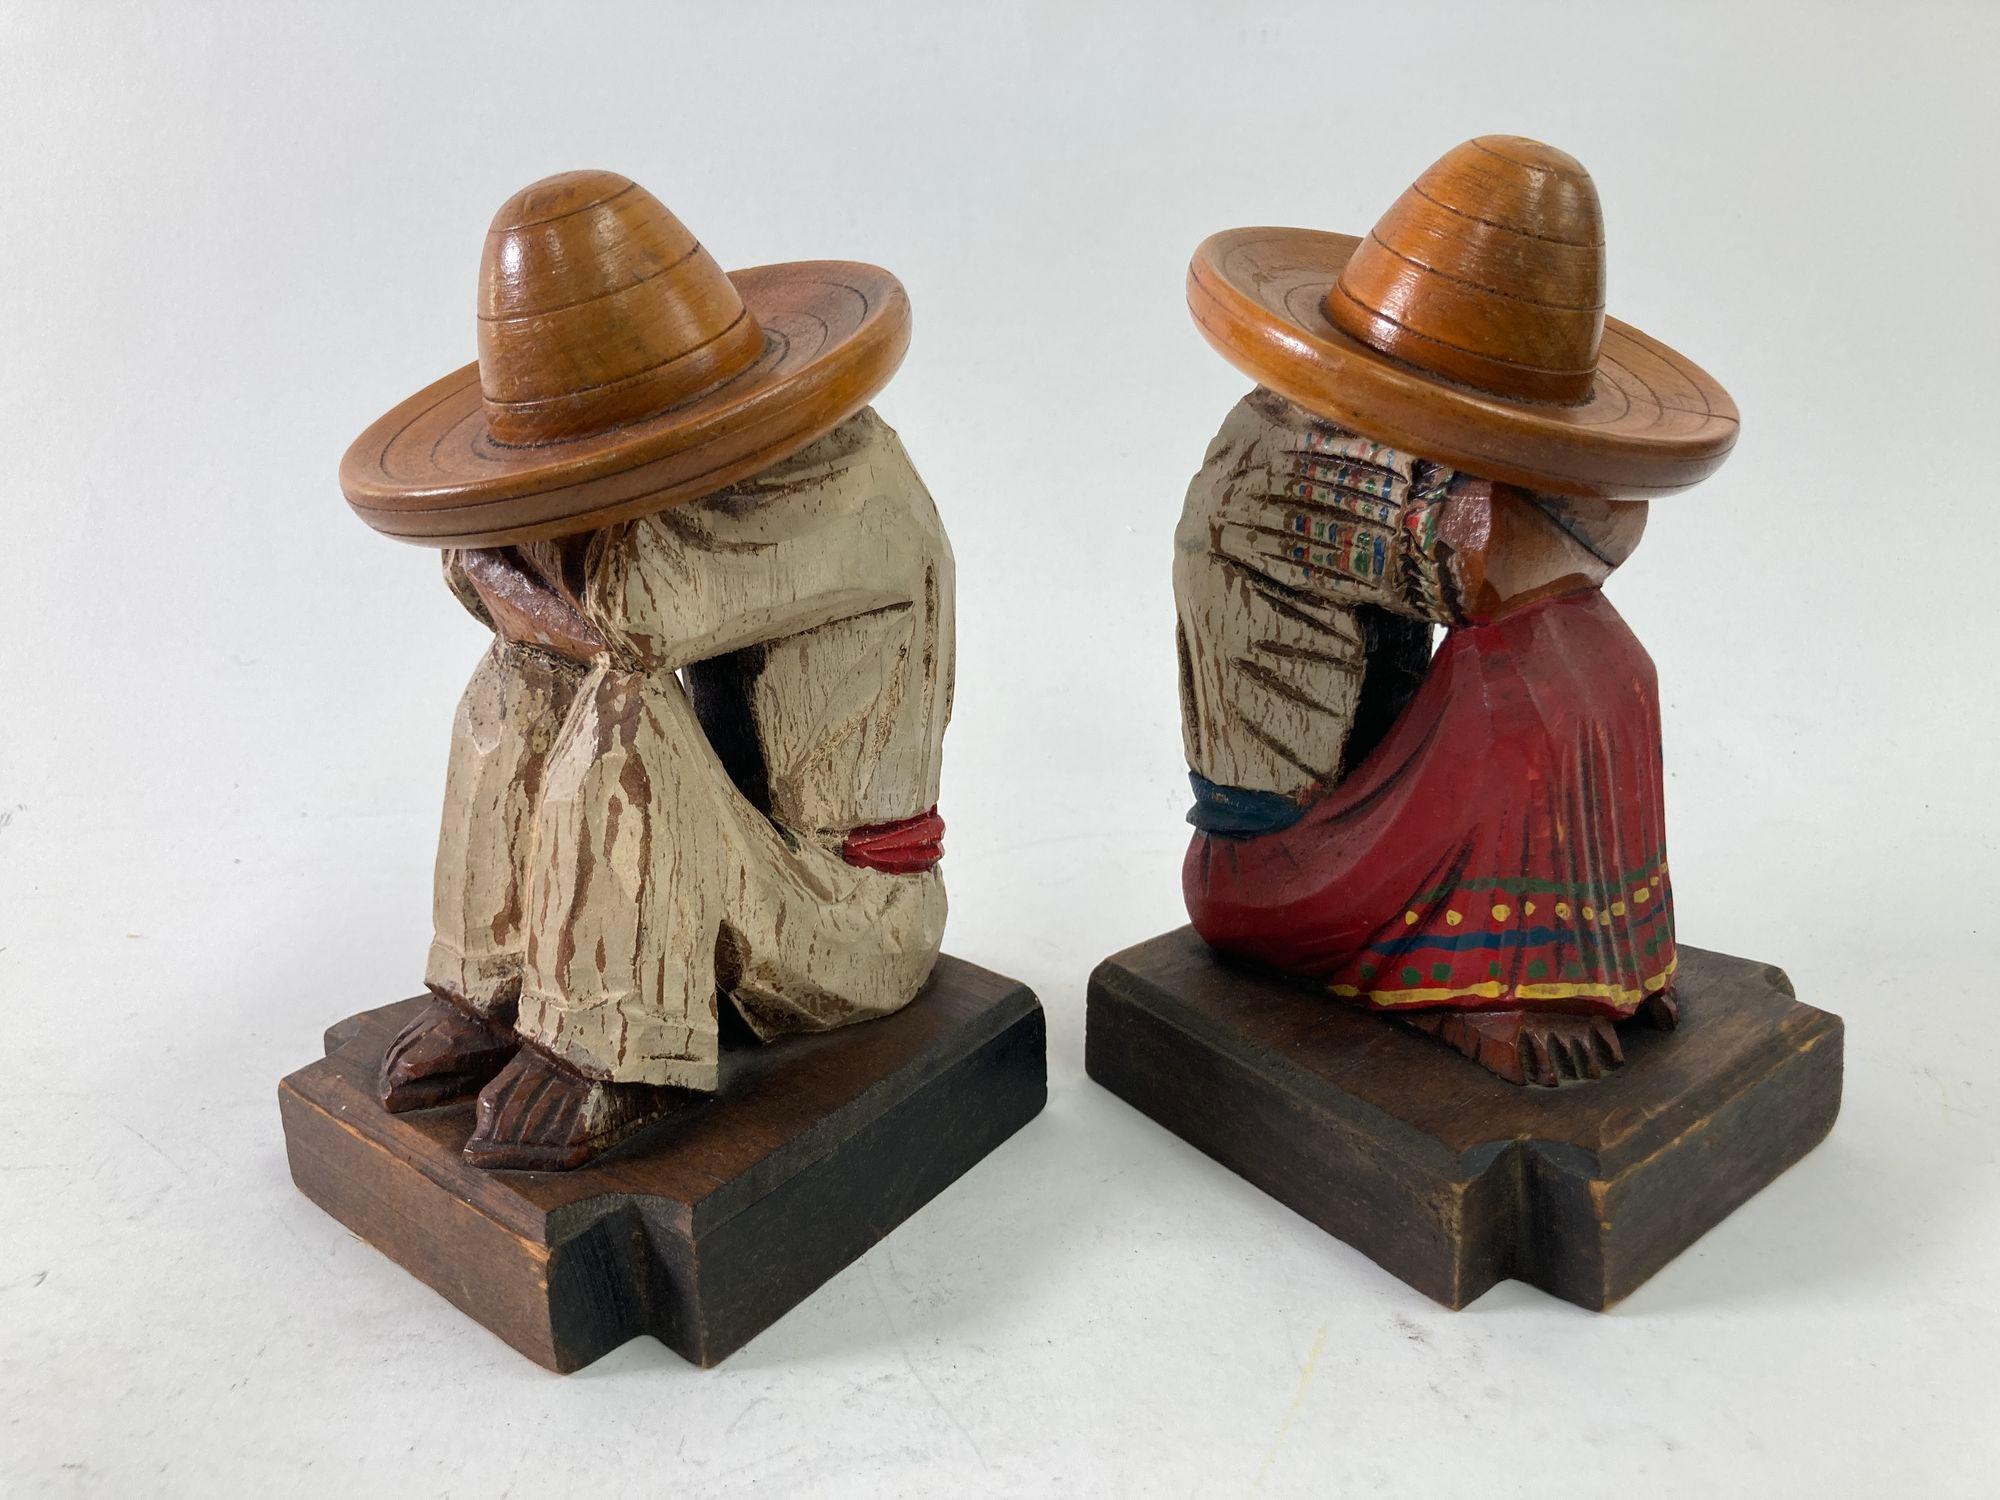 Hand-Carved 1950s Mexican Bookends Siesta Wood Sculpture Polychrome Folk Art